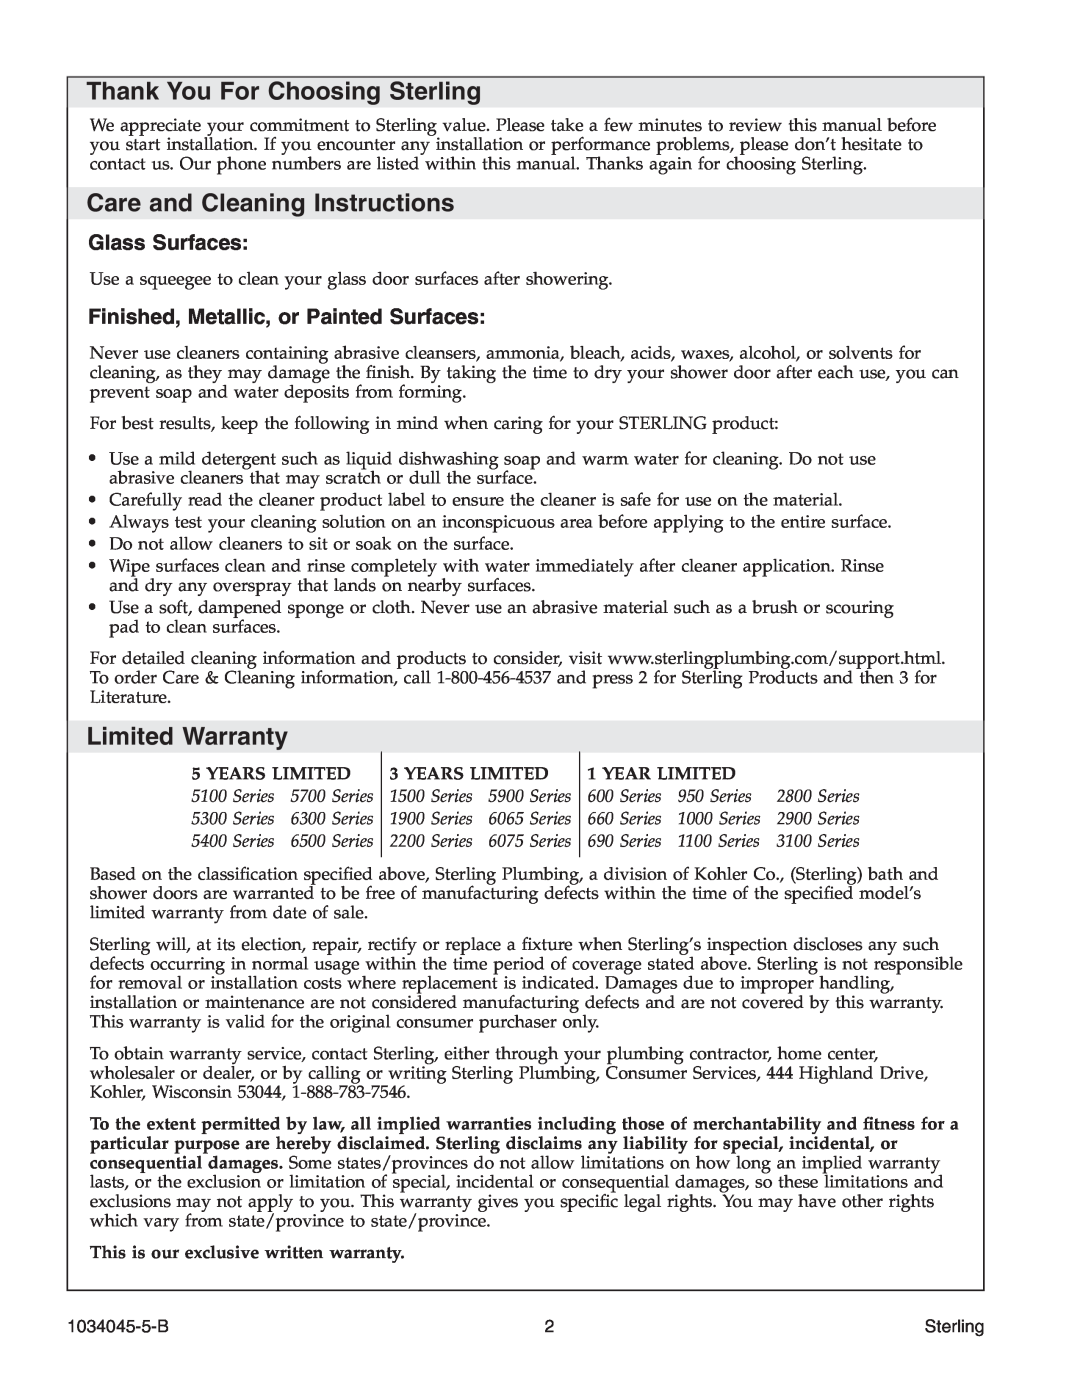 Sterling Plumbing 2200A-36 Thank You For Choosing Sterling, Care and Cleaning Instructions, Limited Warranty, 1034045-5-B 